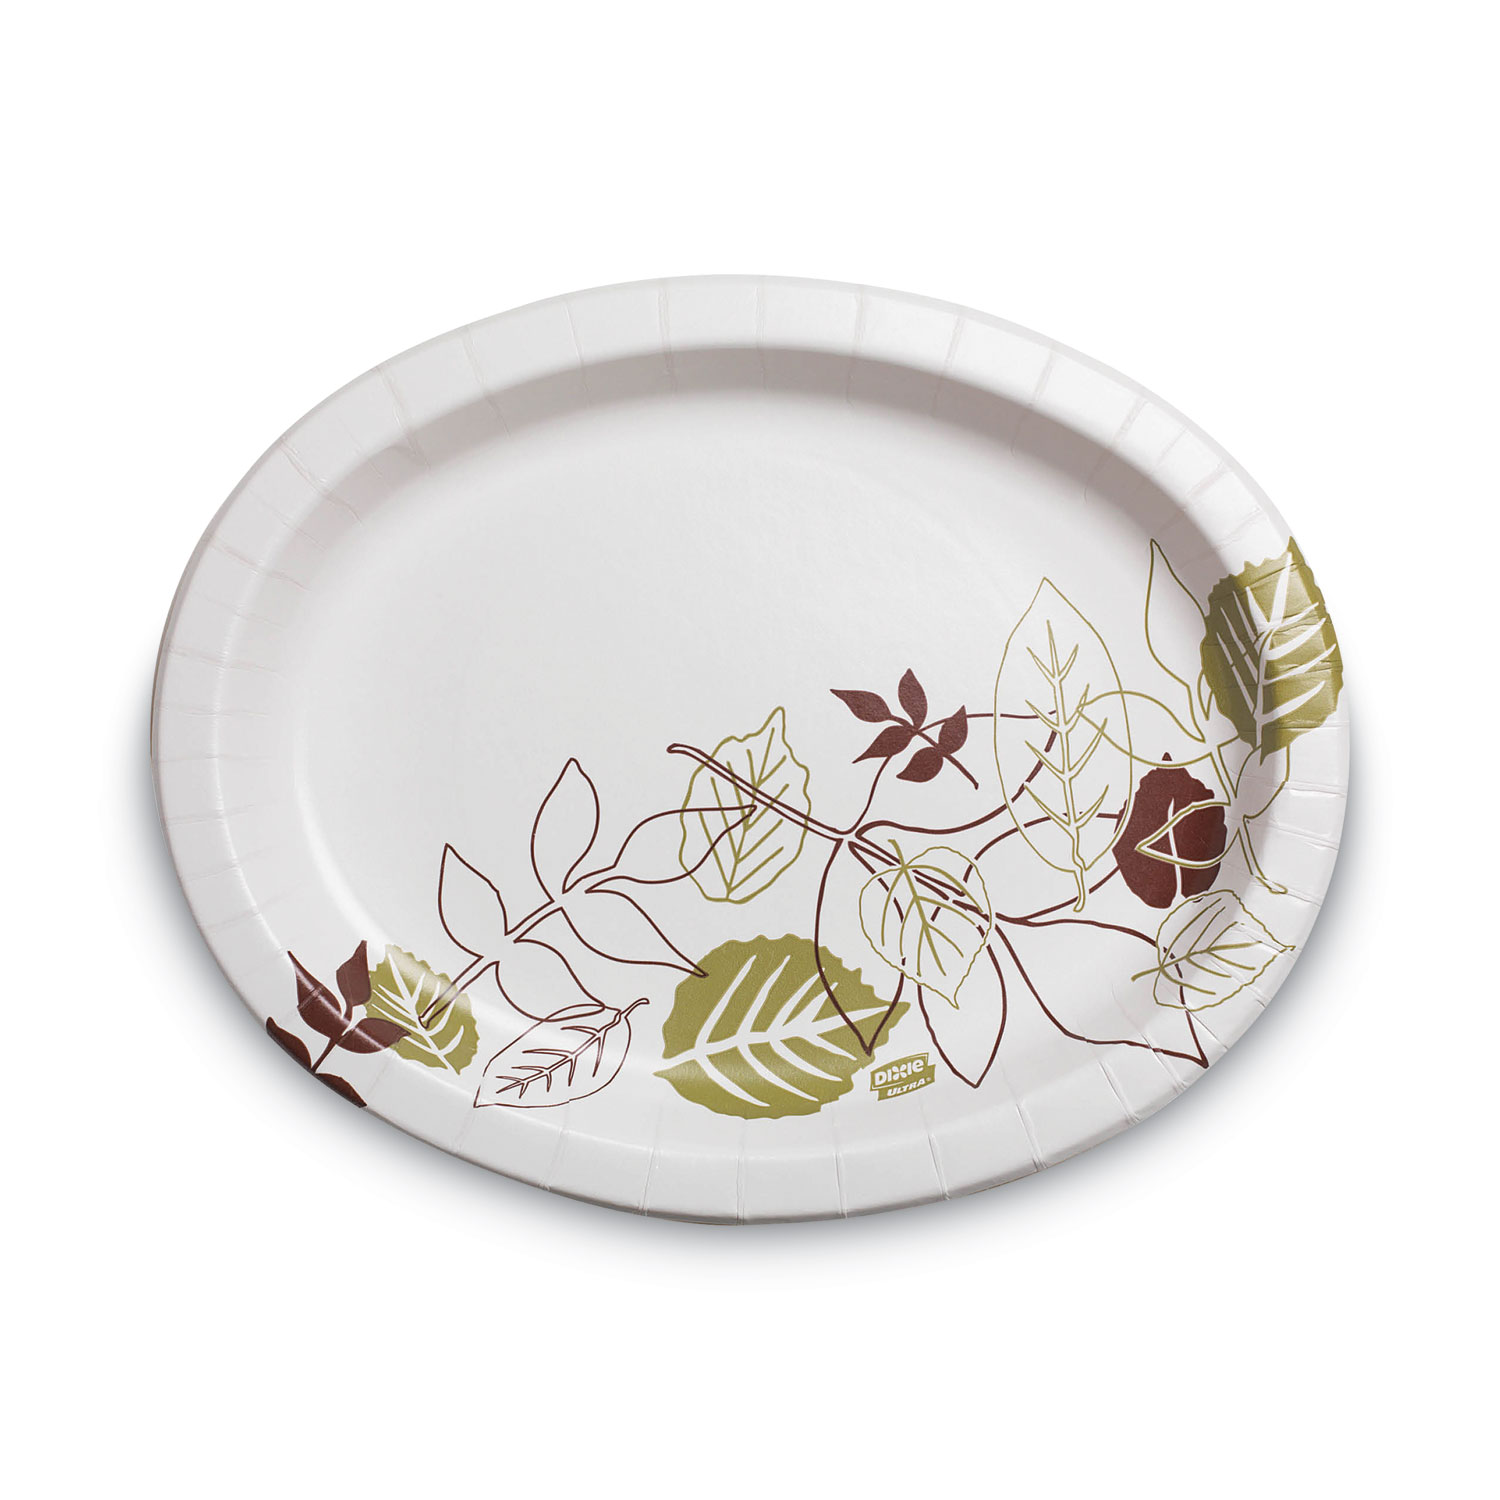 Compatible Dixie Pathway Heavyweight Paper Plates - 125 per pack